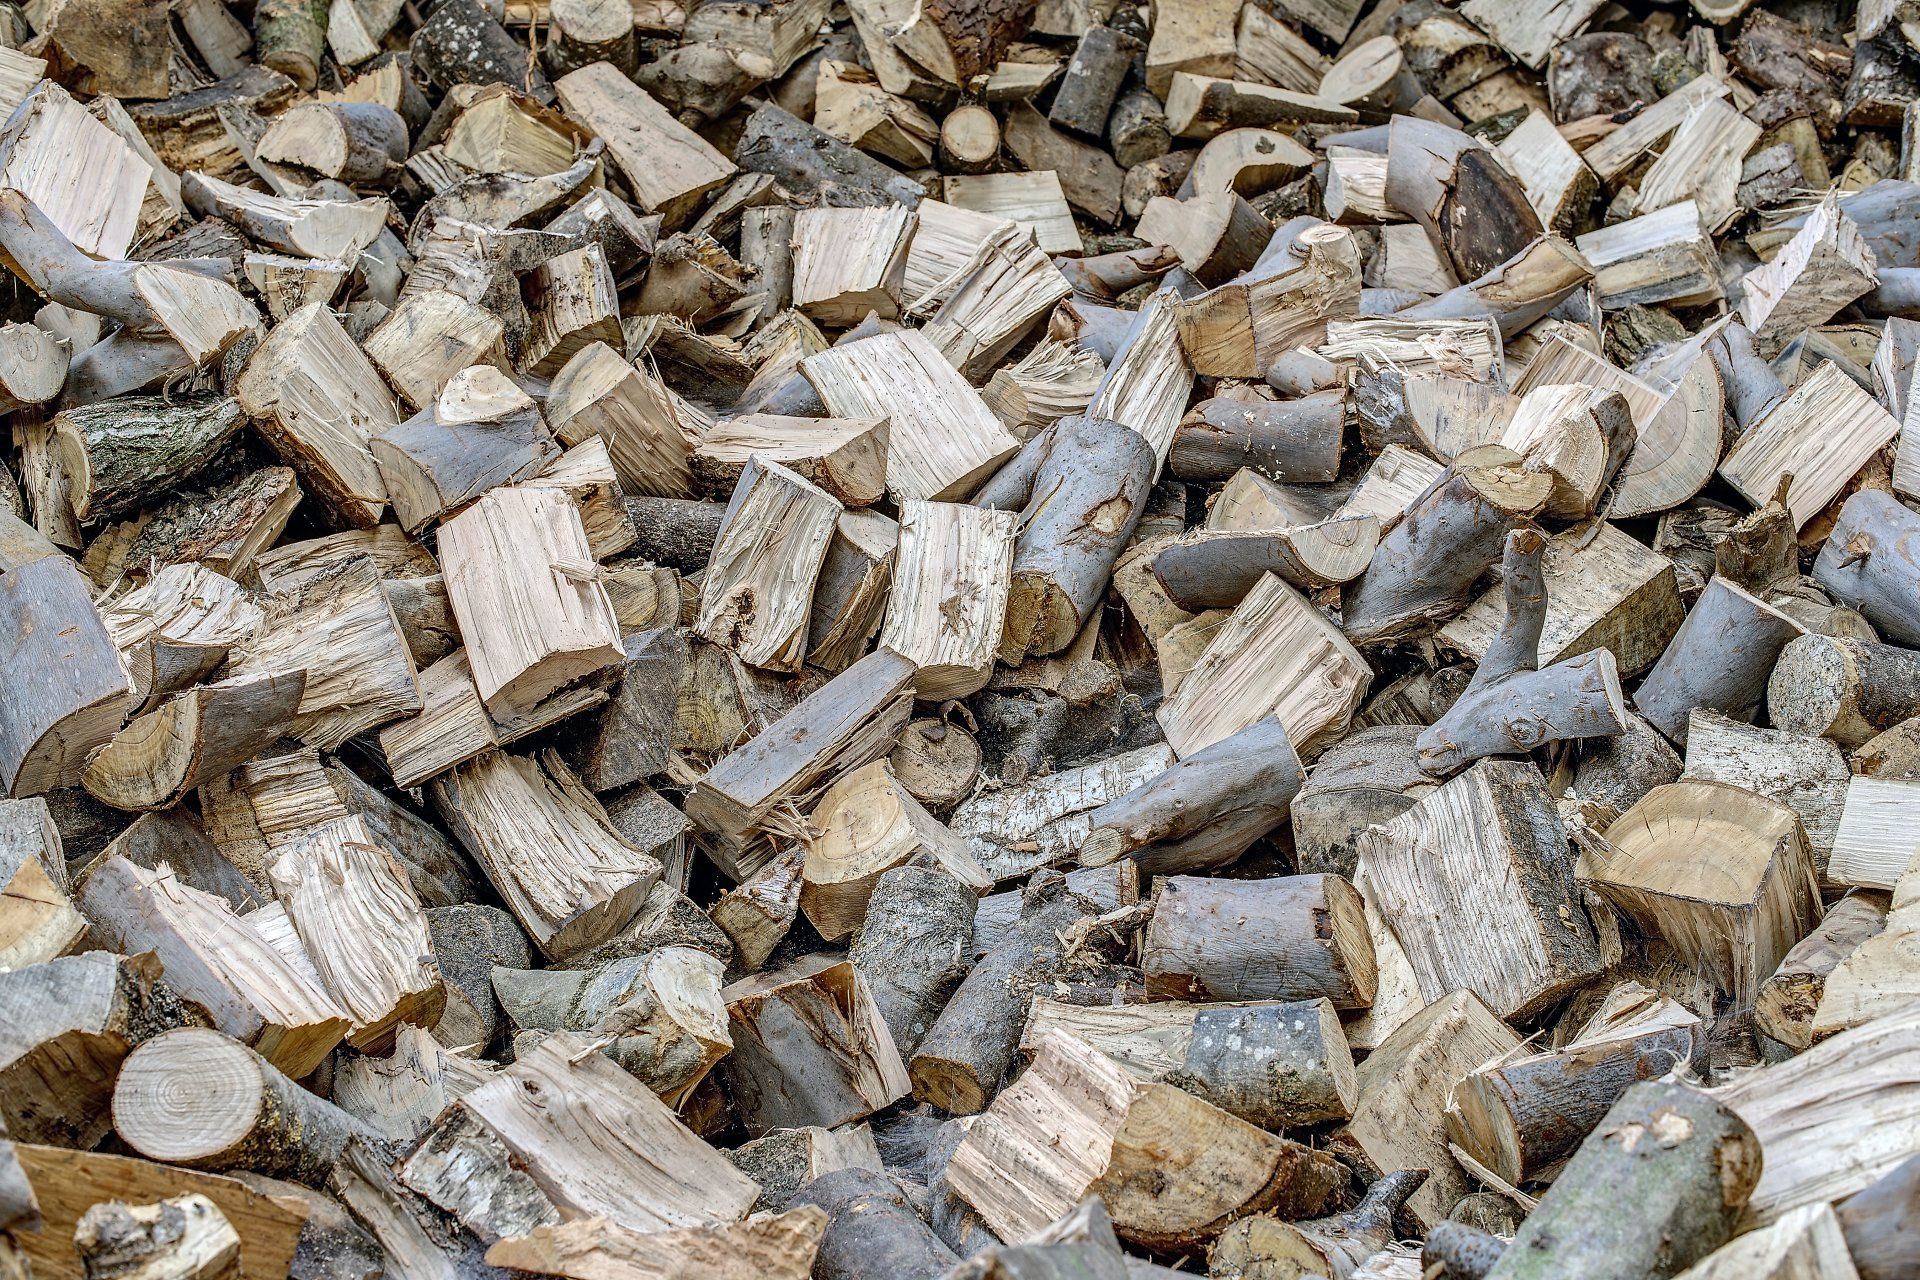 A very large pile of wood logs for log fires and burning